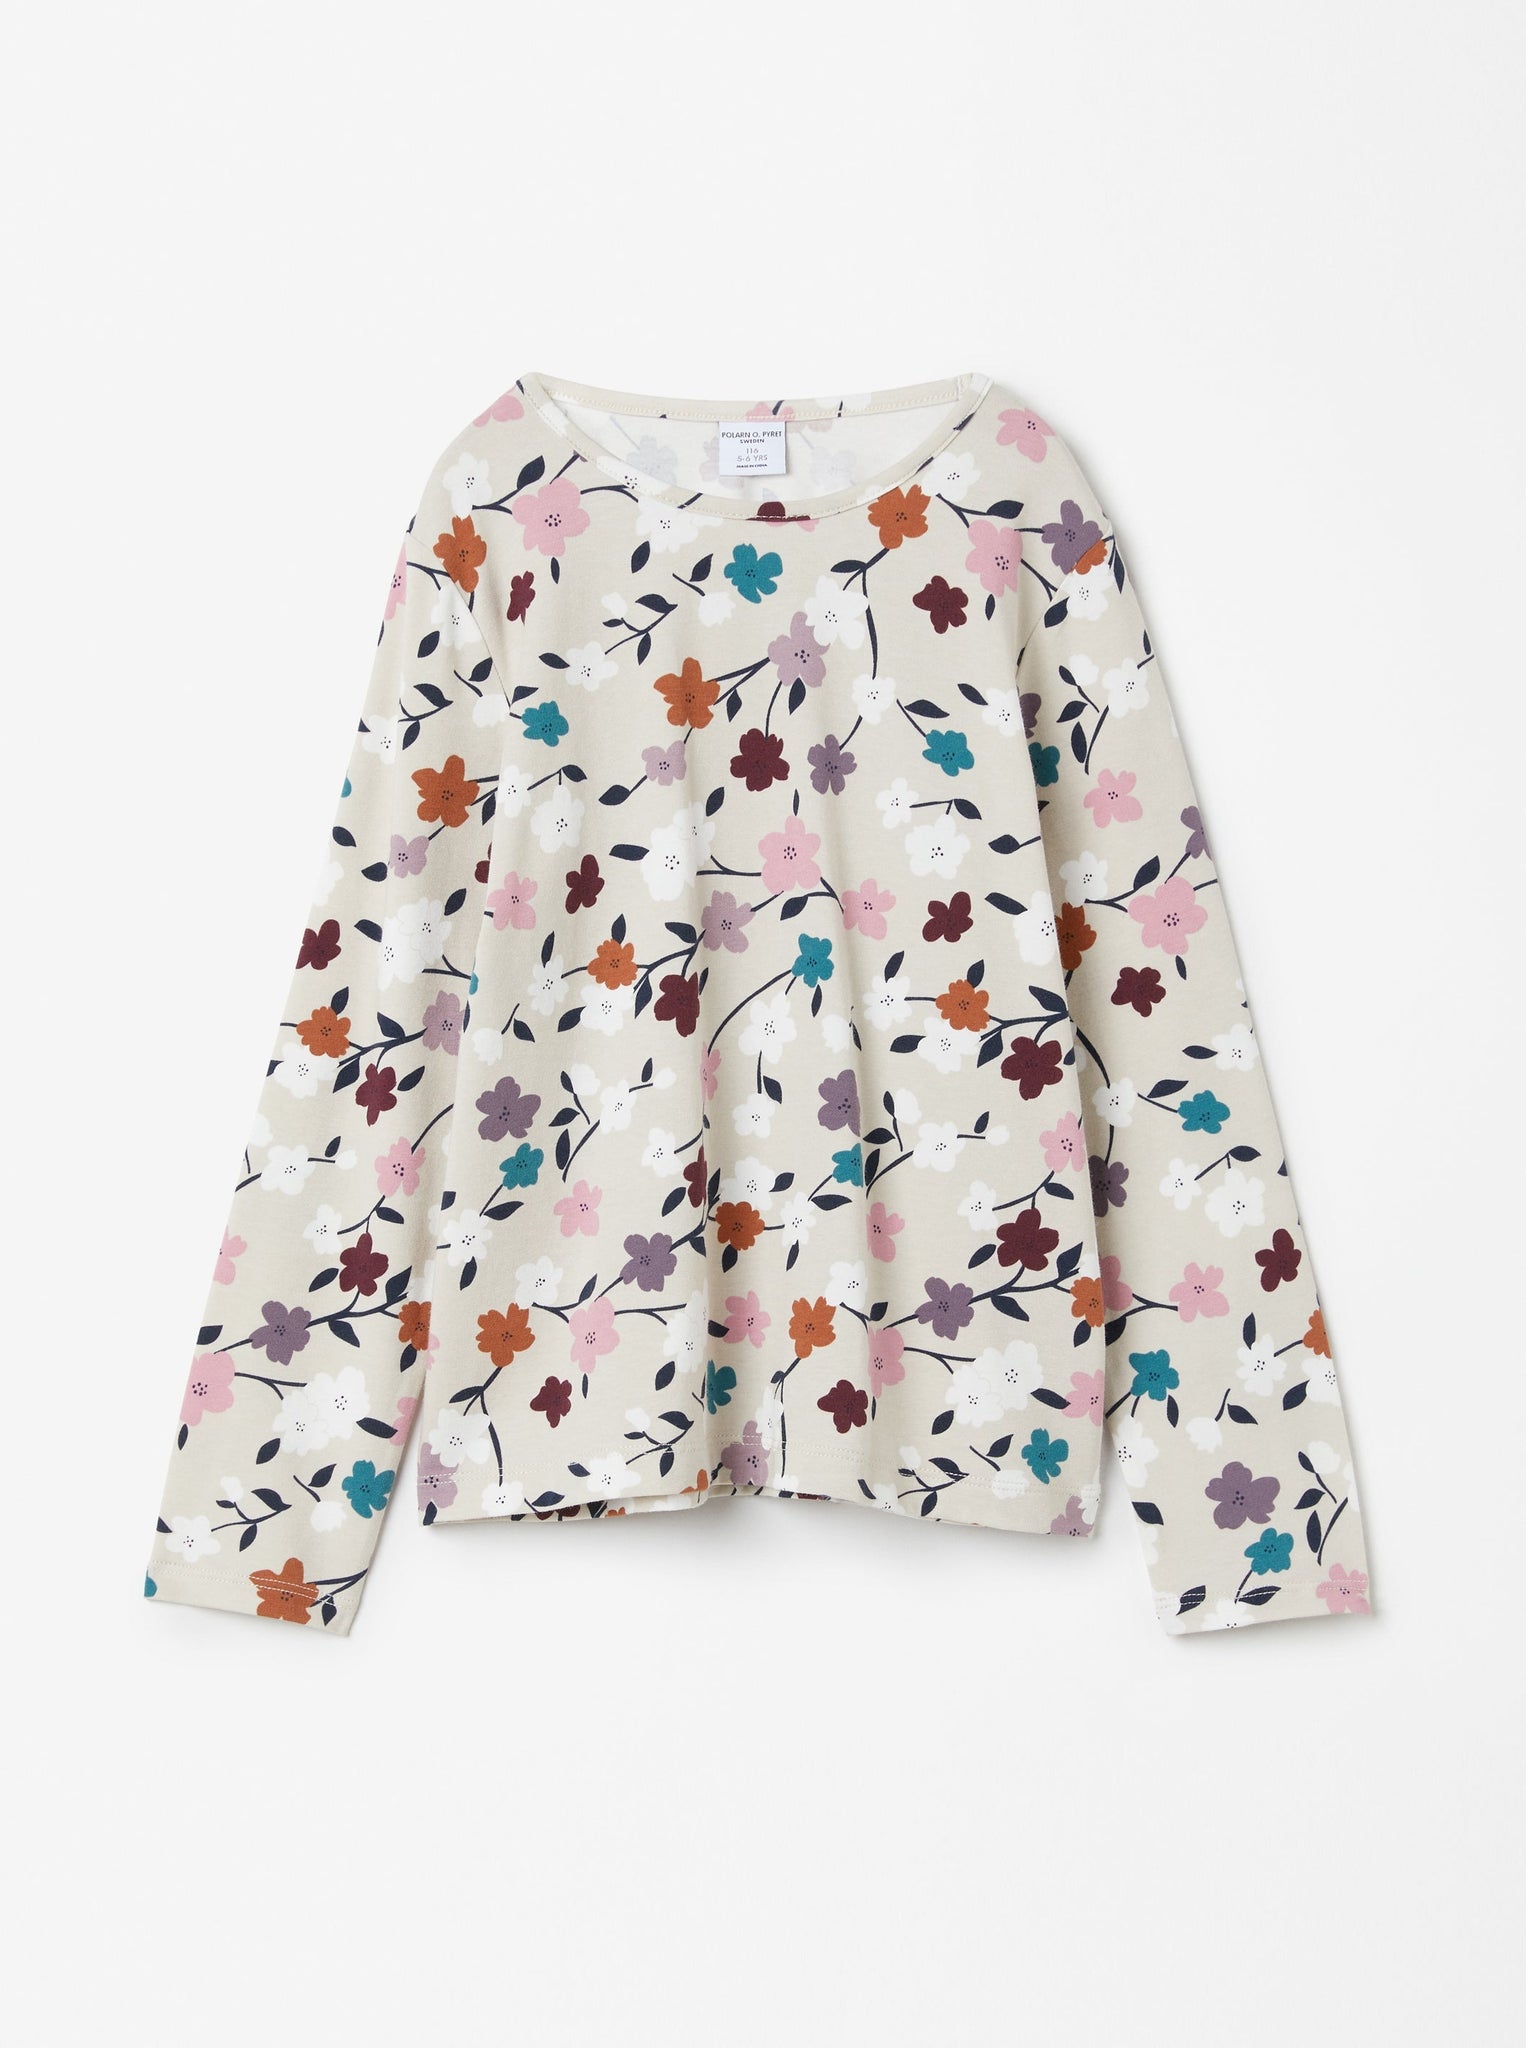 Organic Cotton Floral Kids Top from the Polarn O. Pyret kidswear collection. The best ethical kids clothes